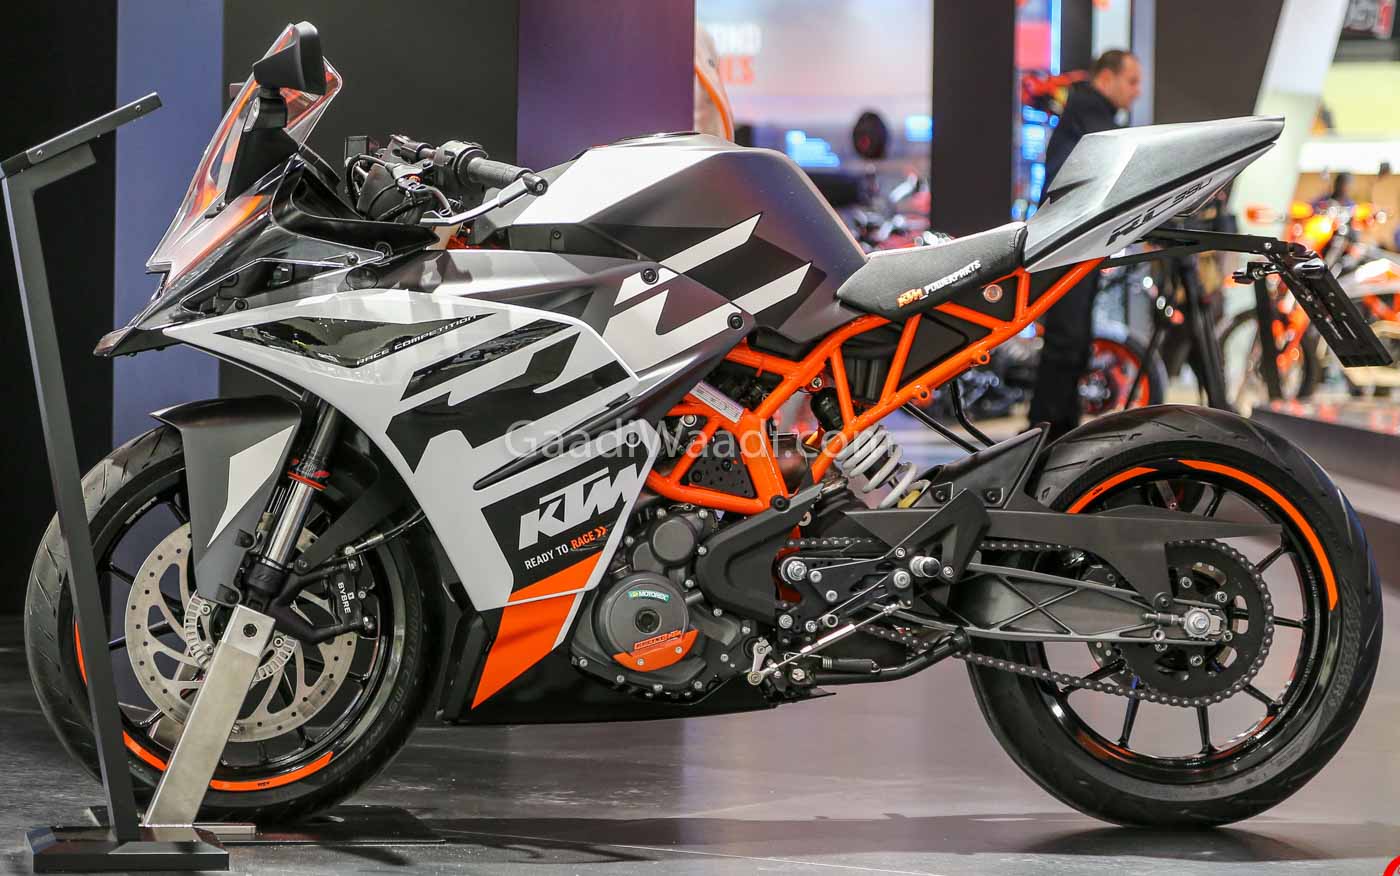 2020 Ktm Rc 390 Image Leaked Online Will Launch In India In 2021